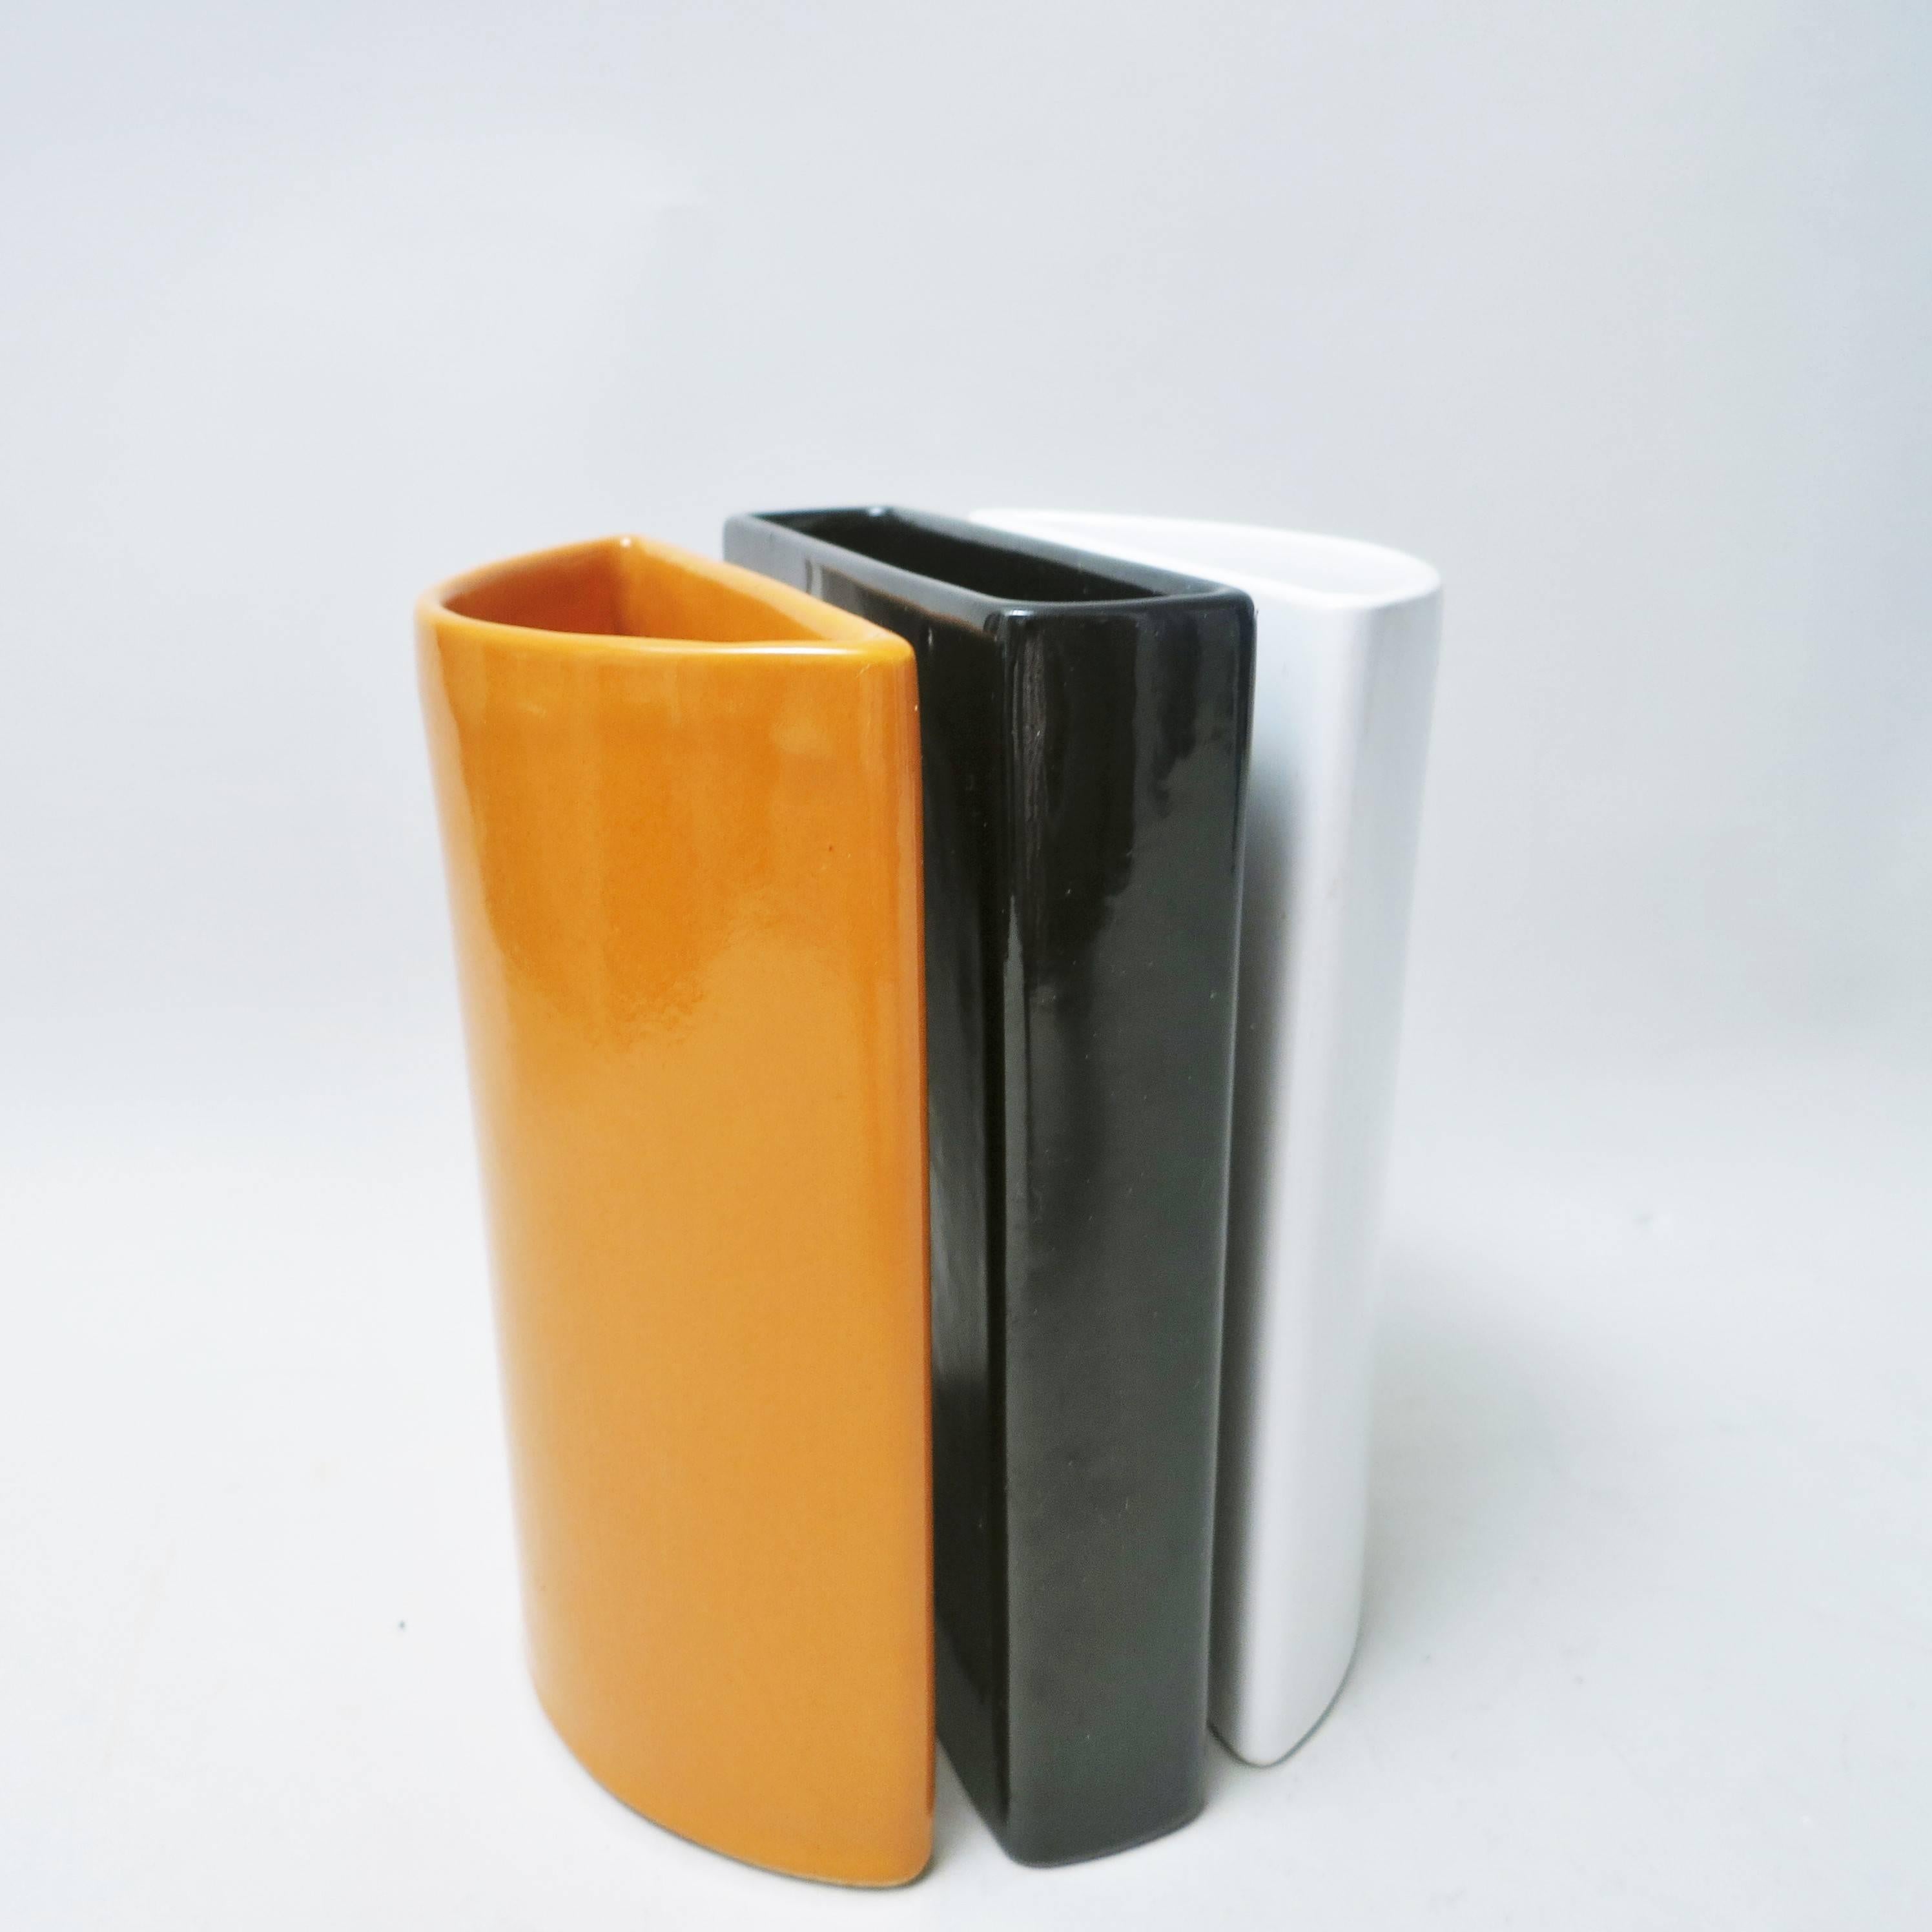 Set of three vases to be combined designed by Italian architect Aldo Cotti for Tronconi in 1970 in ceramic enameled white, black and camel. 
Stamped under the vase with a T.